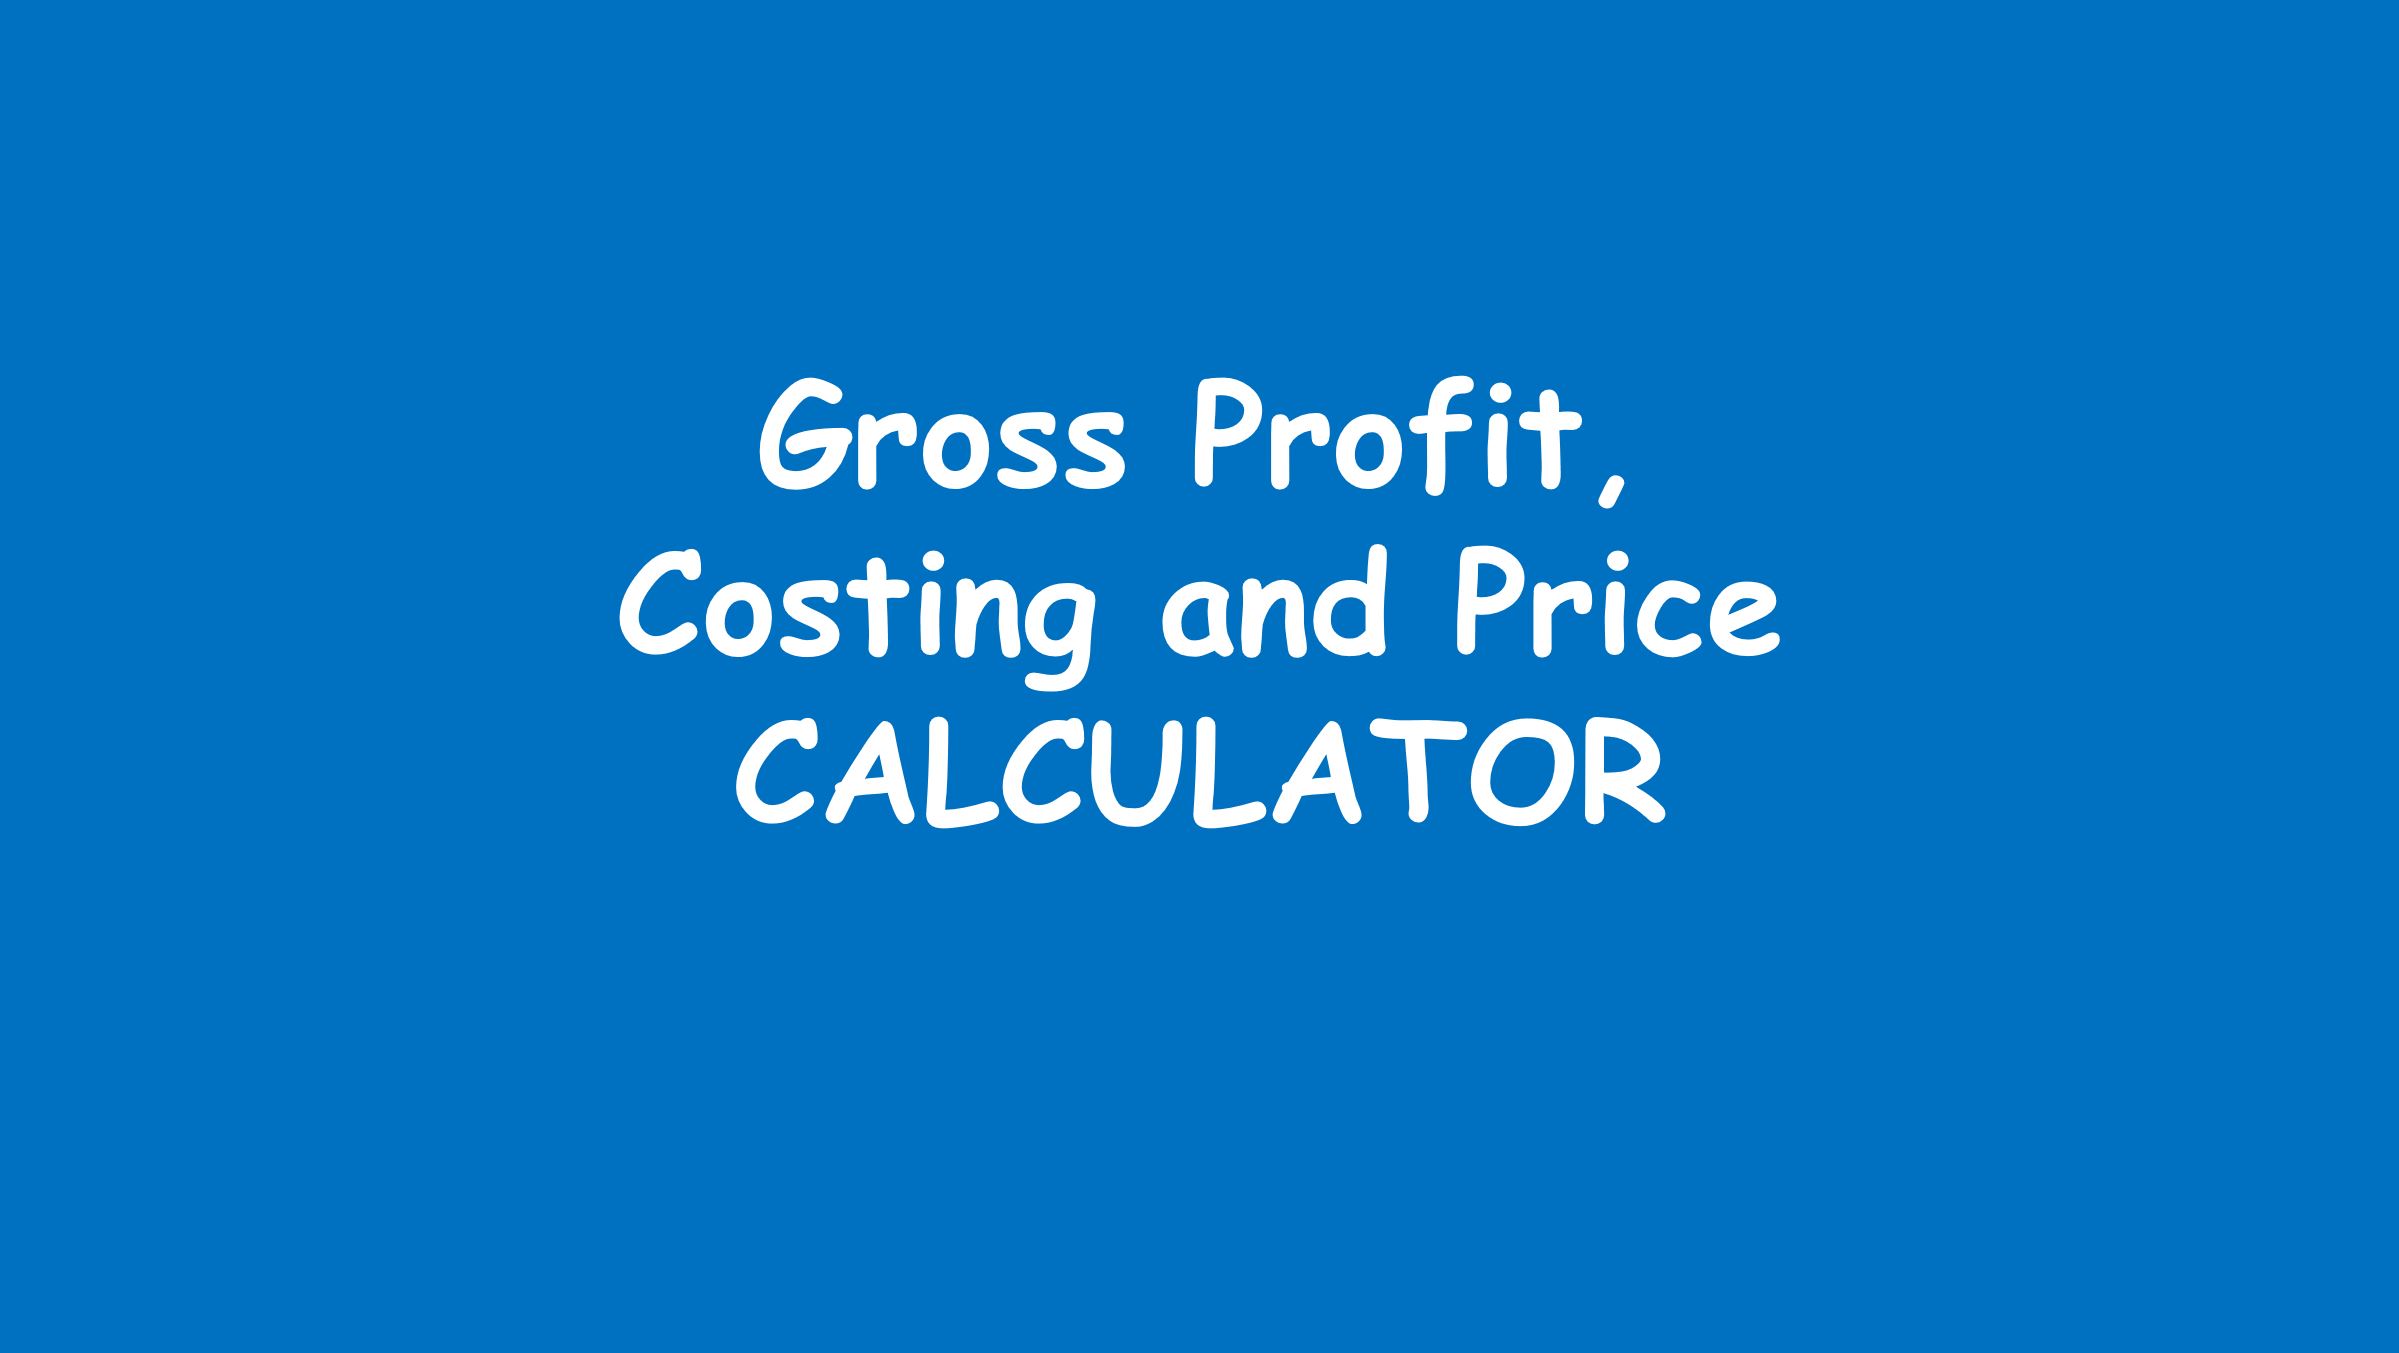 Gross Profit, Costing and Price CALCULATOR